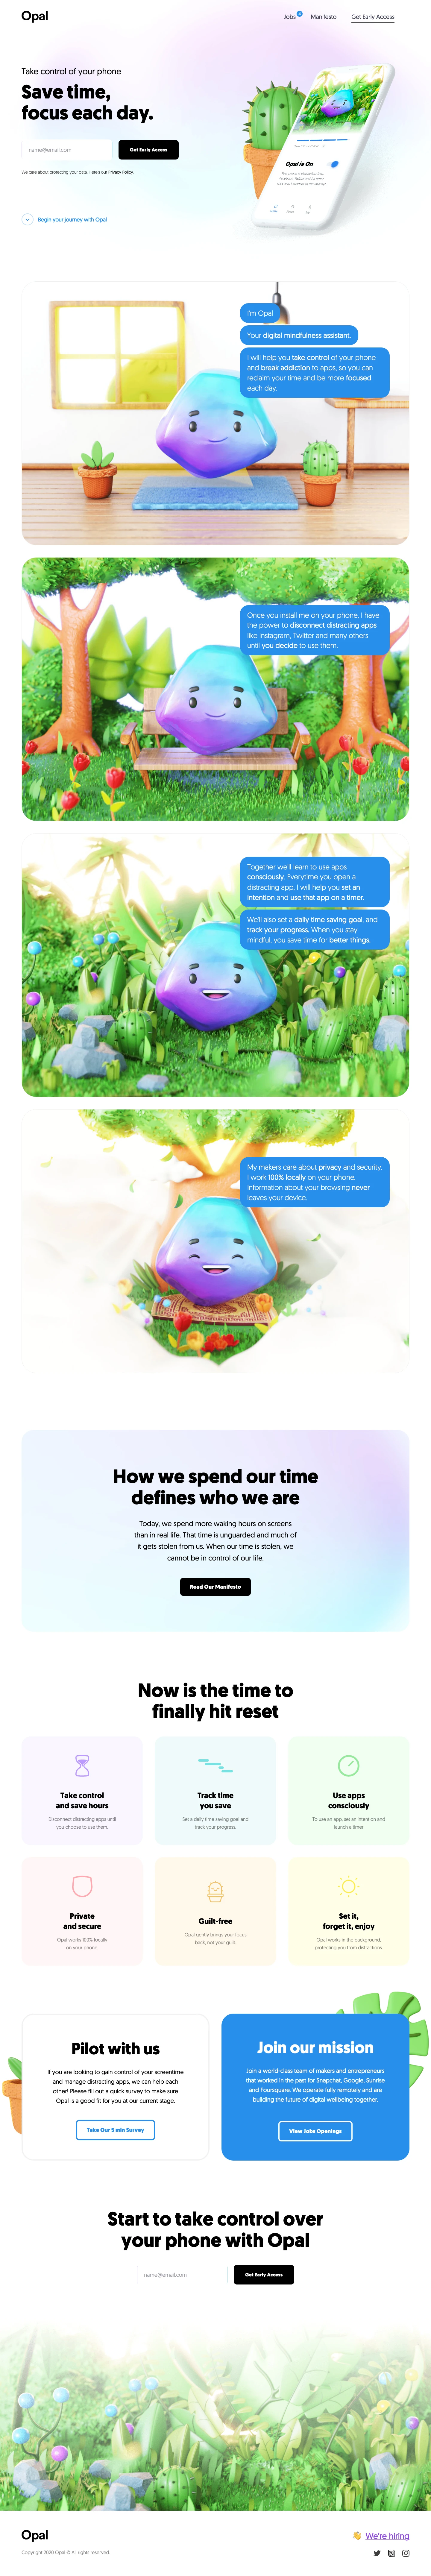 Opal Landing Page Example: Take control of your phone, save time and find focus each day with the Opal app. Once installed on your phone, distracting apps like Instagram, Twitter and others won't connect to the internet until you decide to use them intentionally.